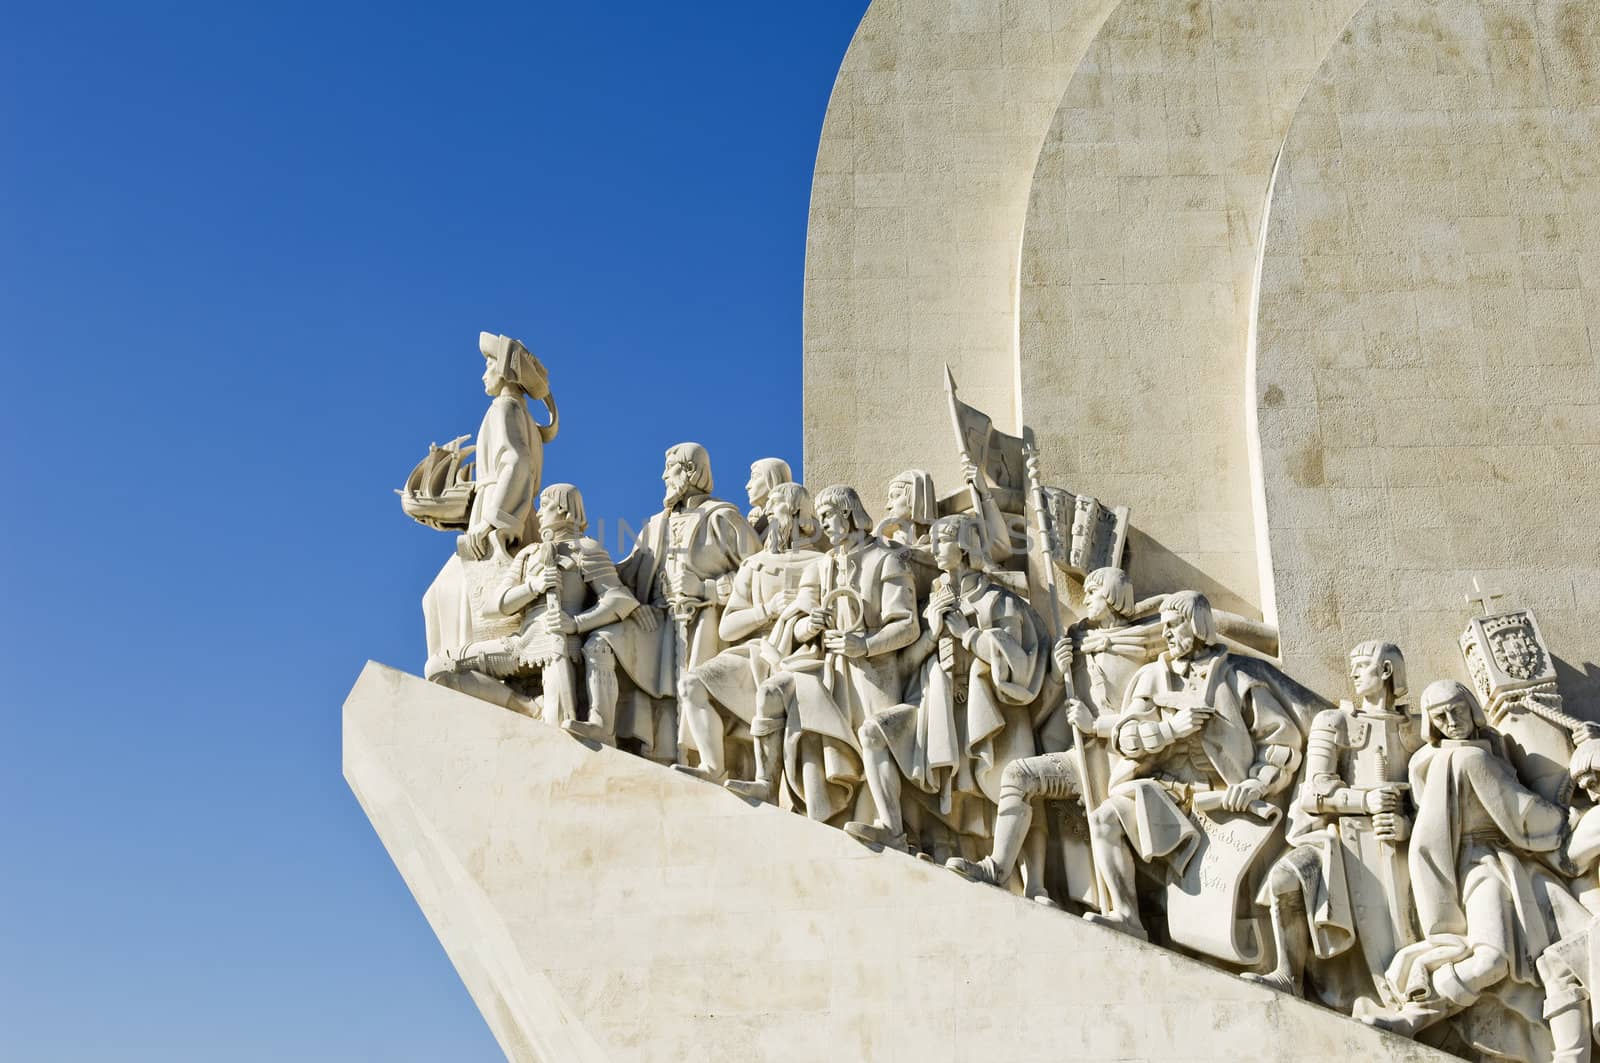 Padrao dos Descobrimentos (Monument to the Discoveries) in the bank of Tagus river, Lisbon, Portugal